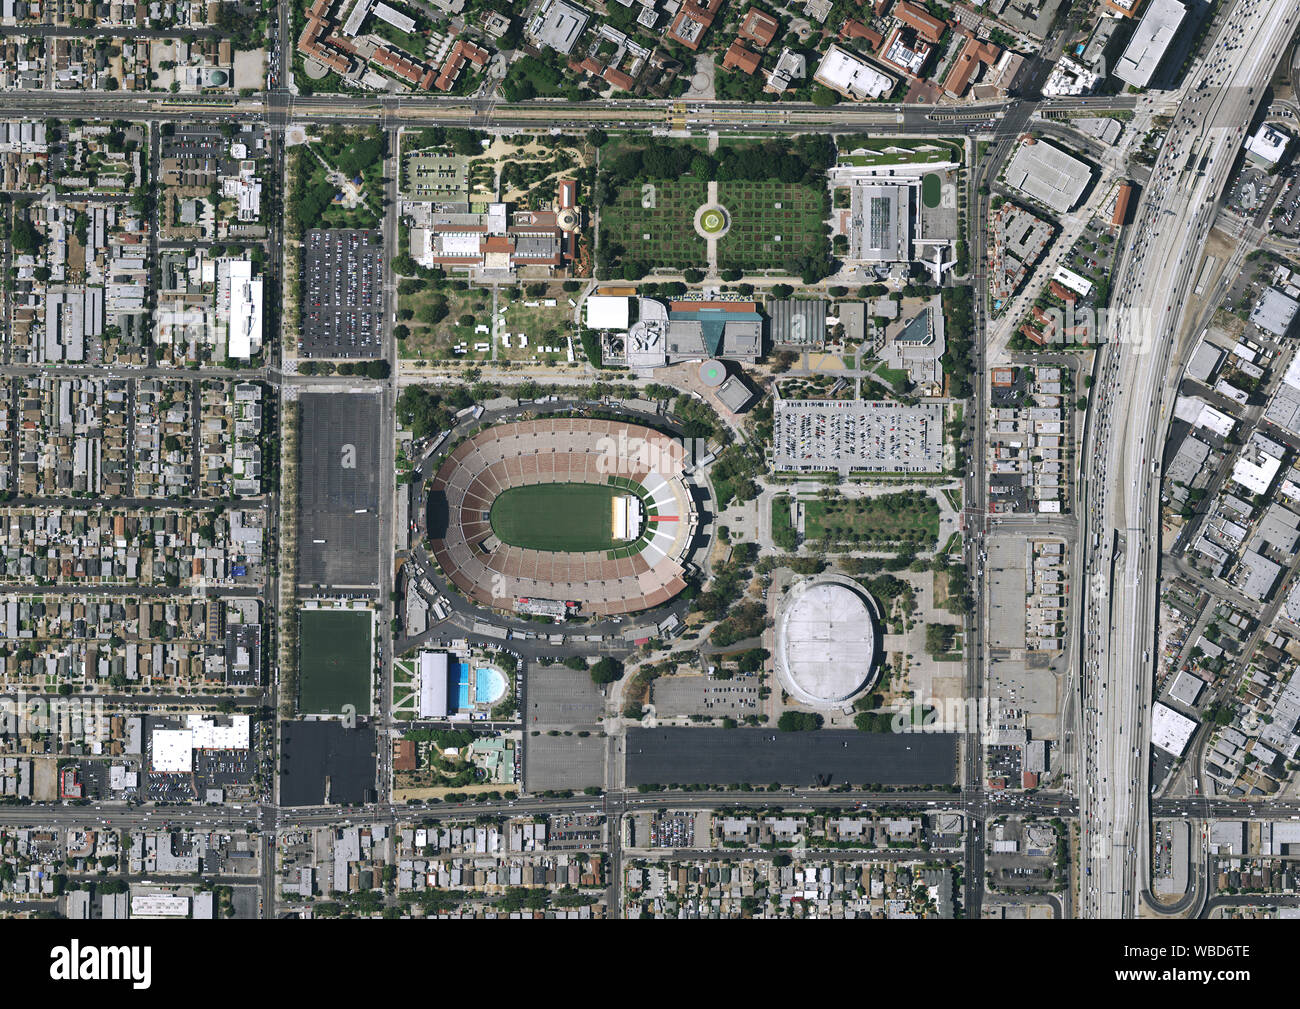 Aerial photography of Memorial Coliseum, Los Angeles, California, USA. Image collected on July 07, 2016. Stock Photo